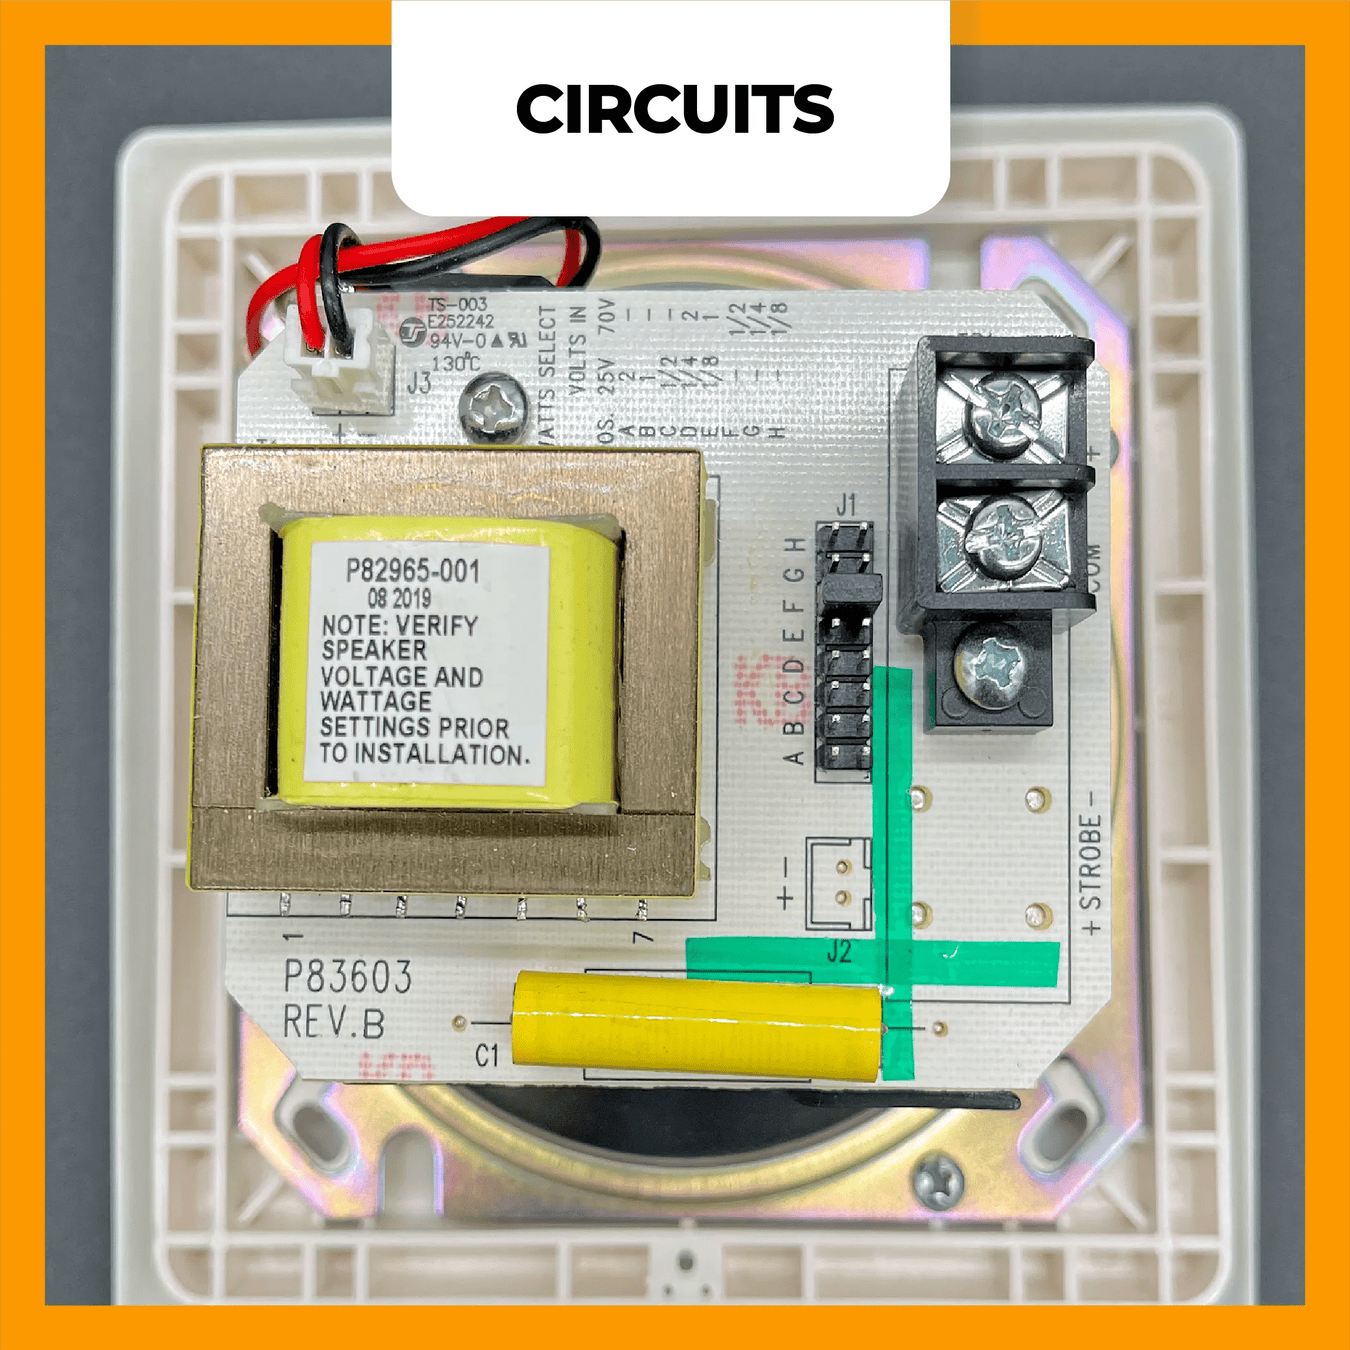 Circuits - Tape Providers